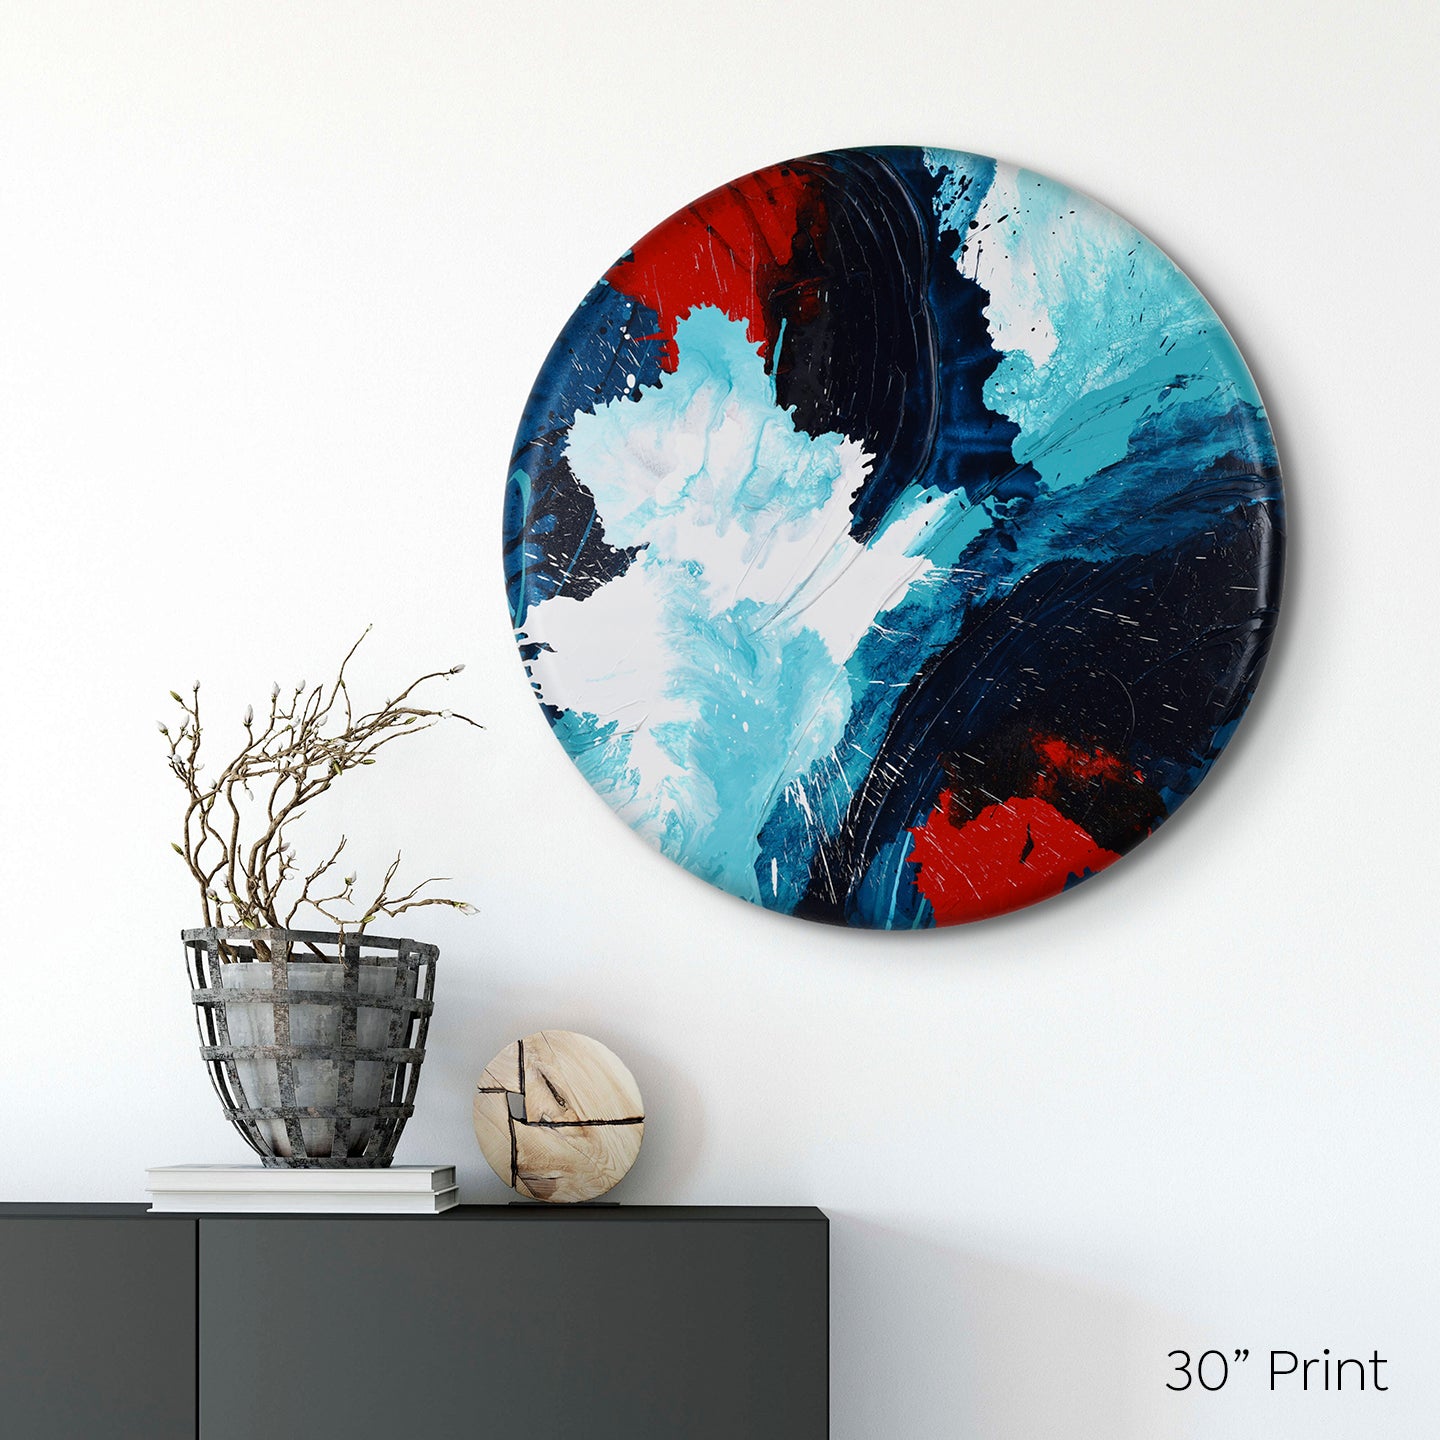 Abstract, expressionism, acrylic 30” print: overlapping explosions of dark blue, turquoise, bright red and white on a medium white wall above a dark sideboard